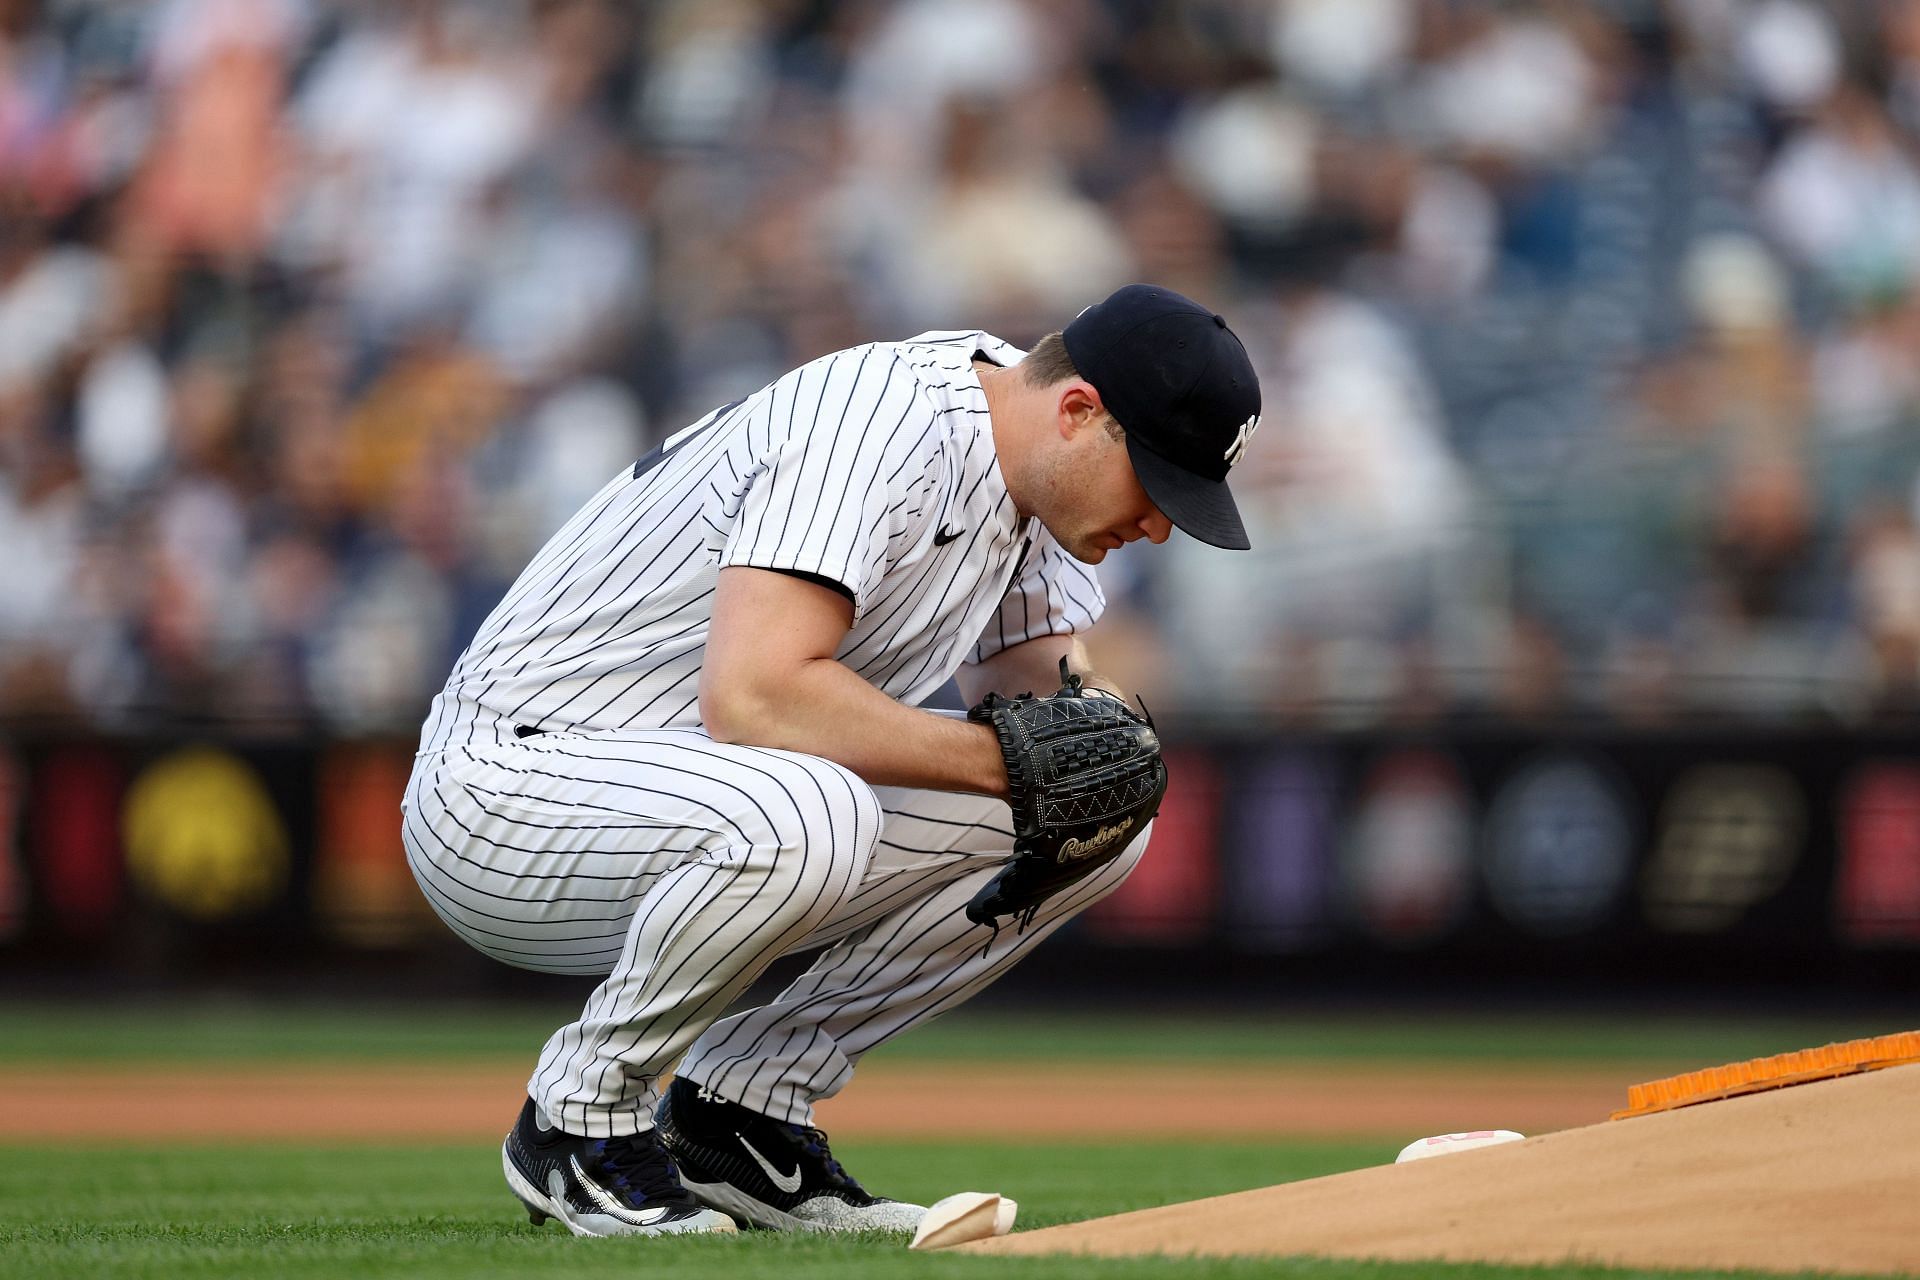 Gerrit Cole struggled for the New York Yankees on Tuesday